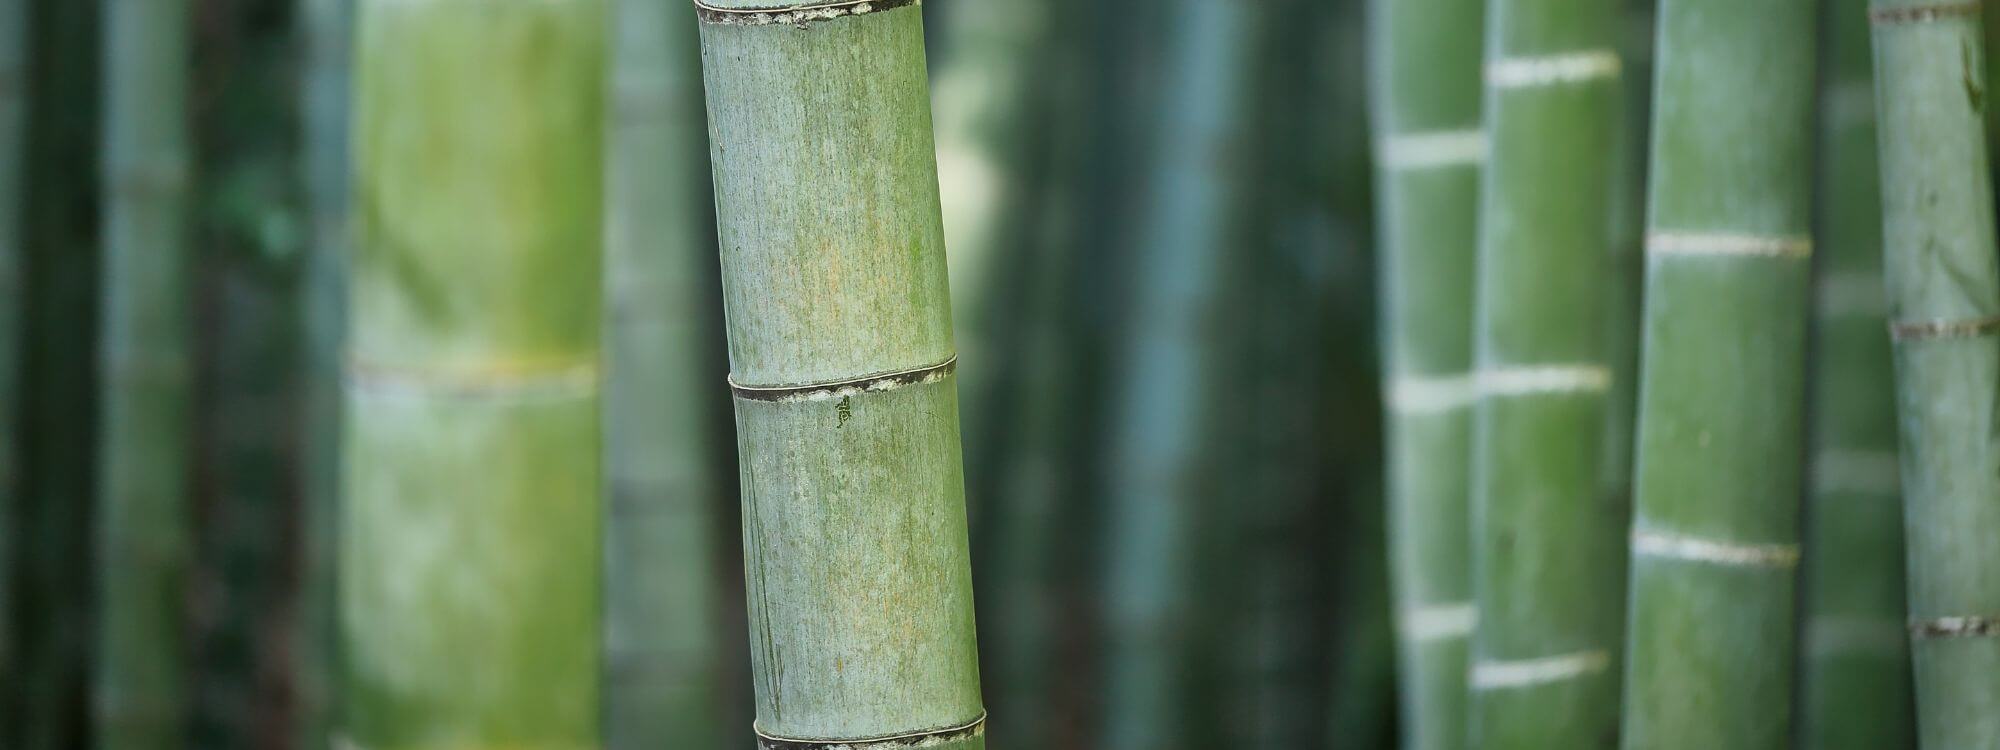 bamboo stalks growing in the wild